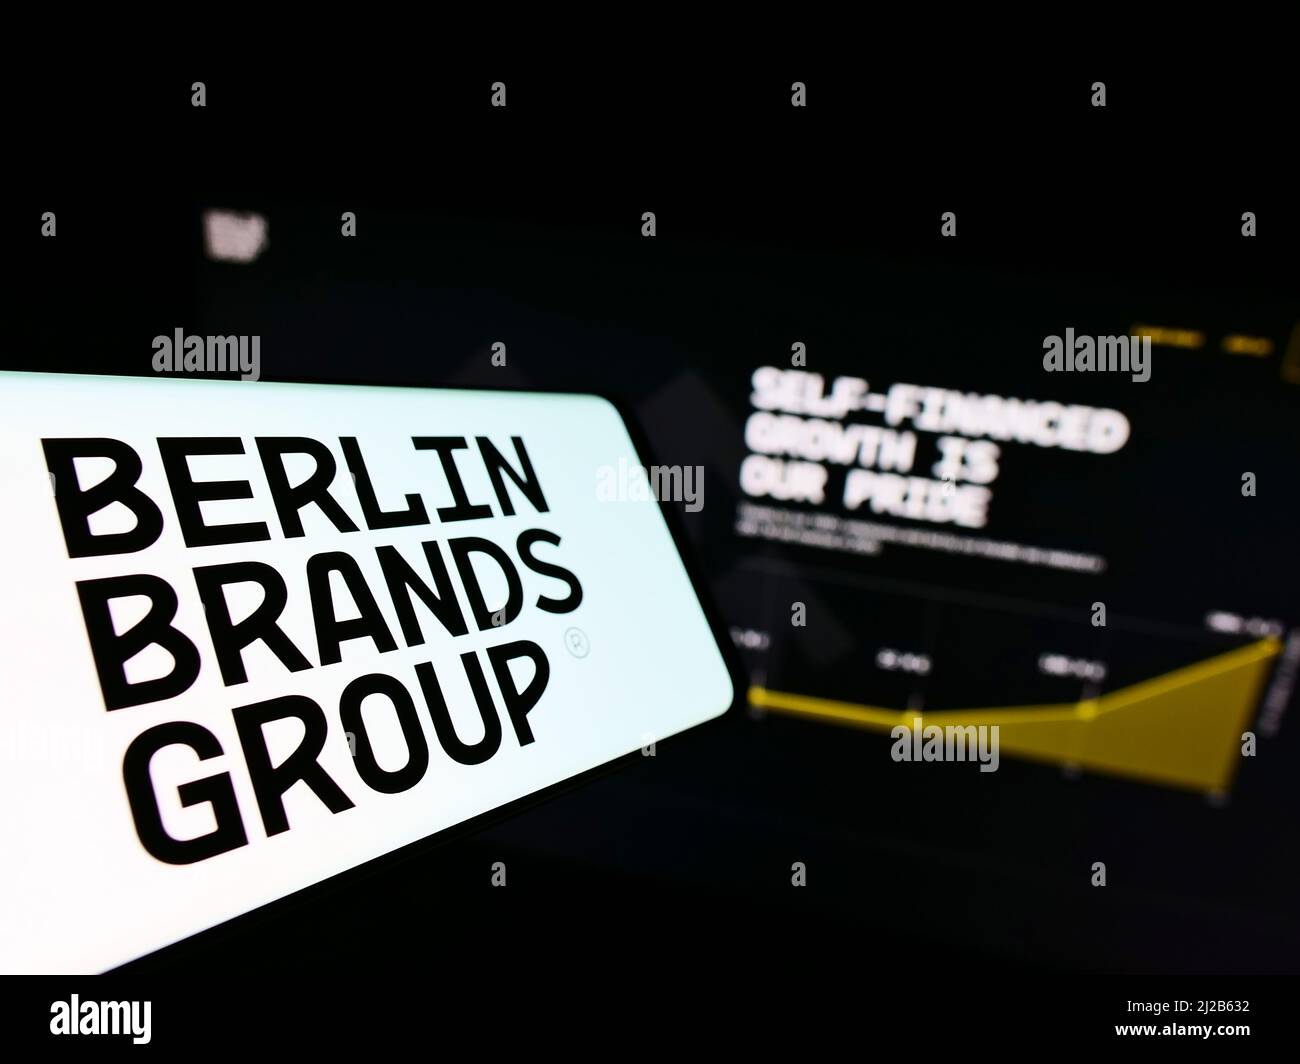 Cellphone with logo of company Chal-Tec GmbH (Berlin Brands Group) on screen in front of business website. Focus on center of phone display. Stock Photo